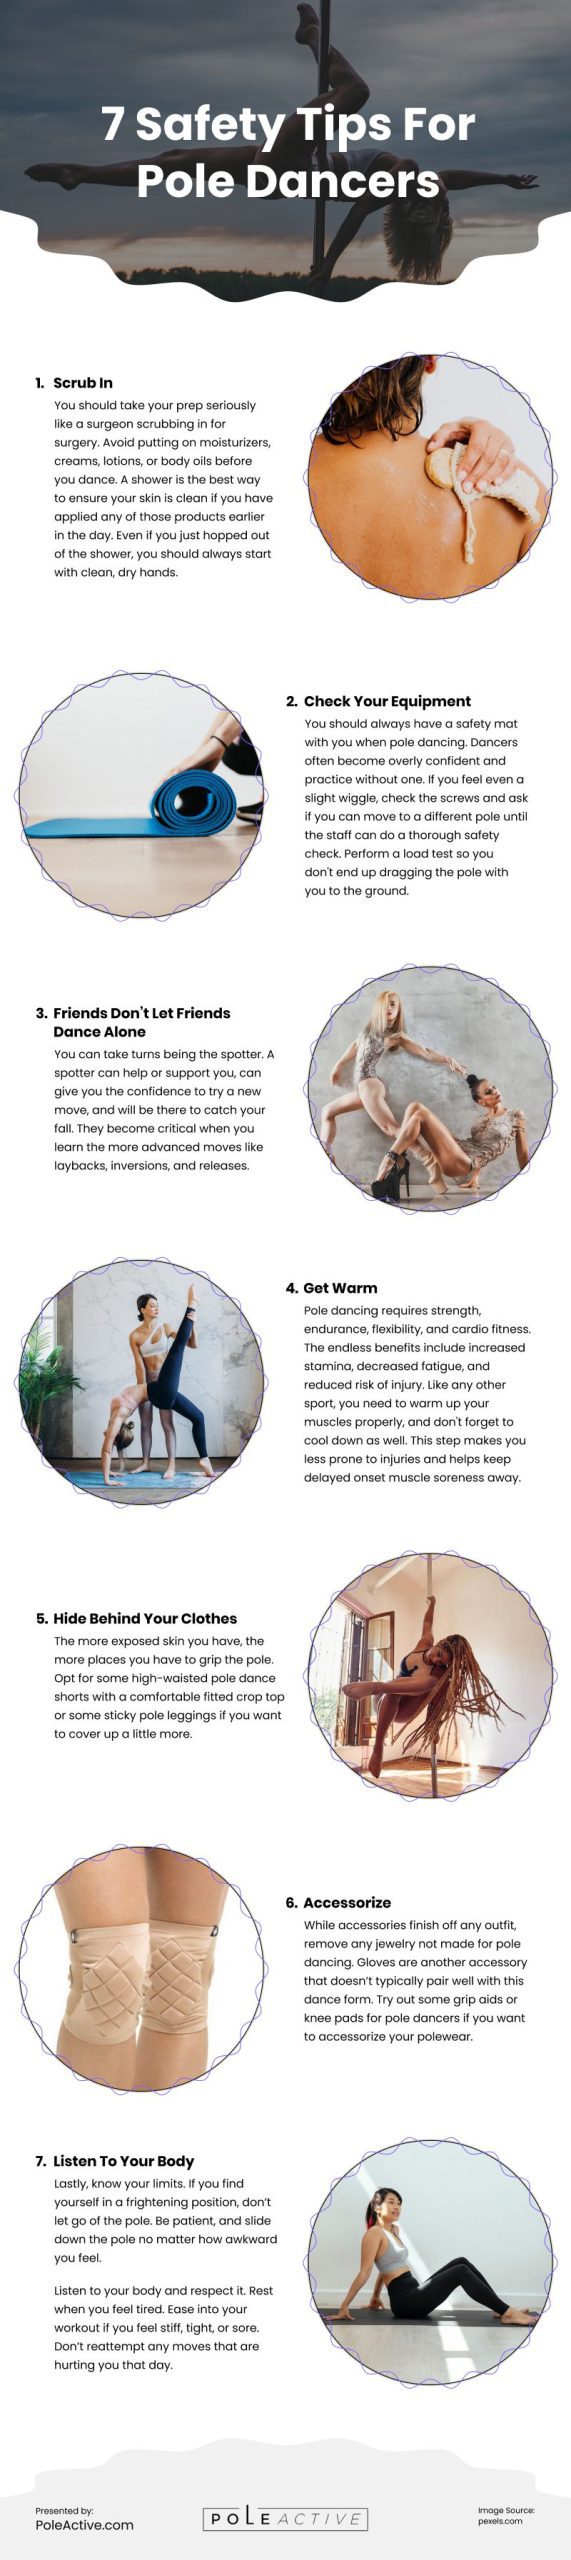 7 Safety Tips For Pole Dancers Infographic